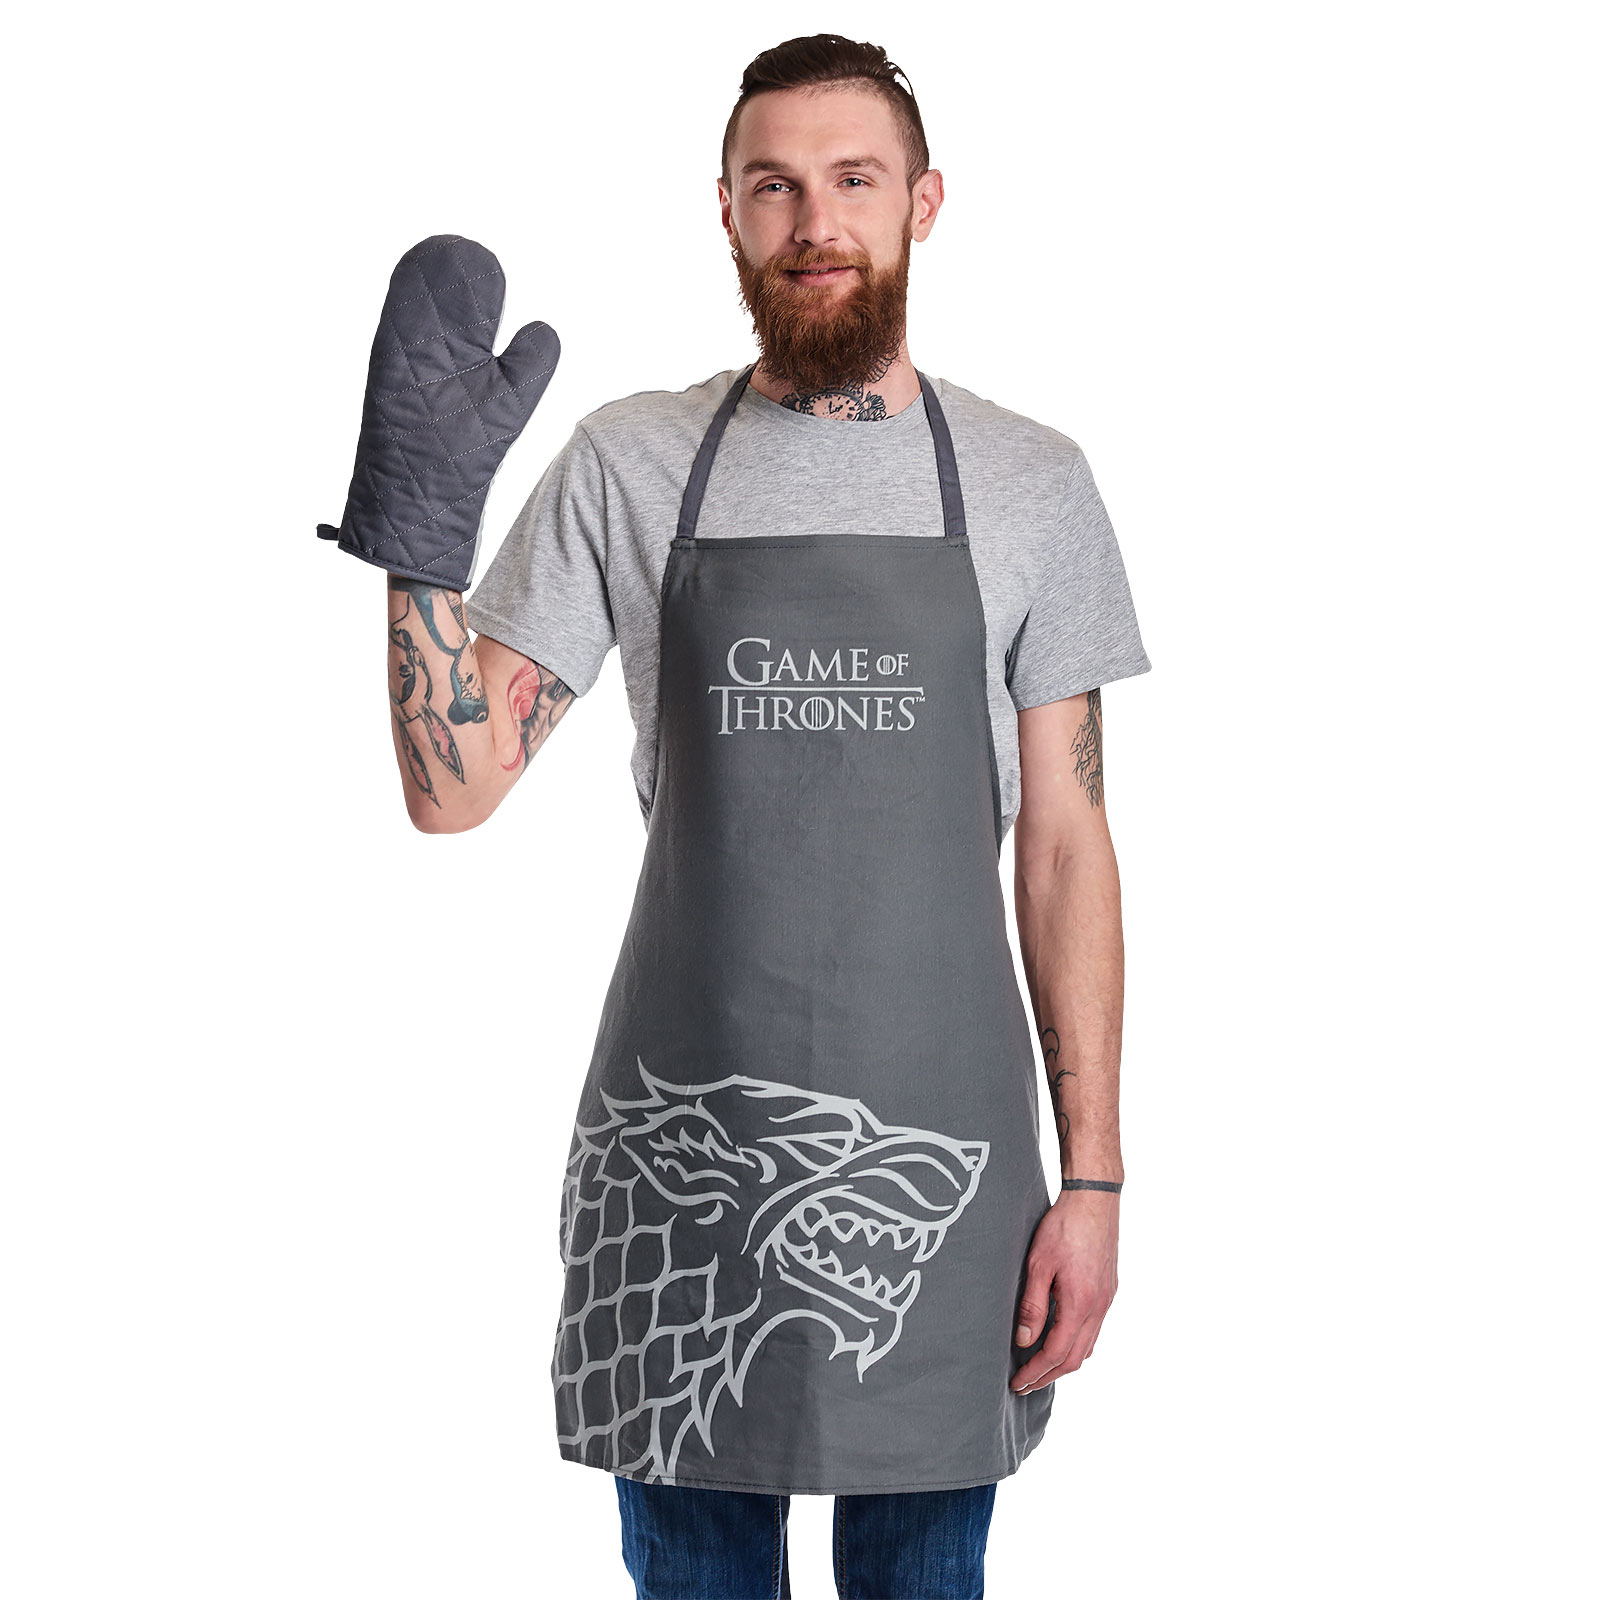 Game of Thrones - House Stark Apron with Oven Mitt